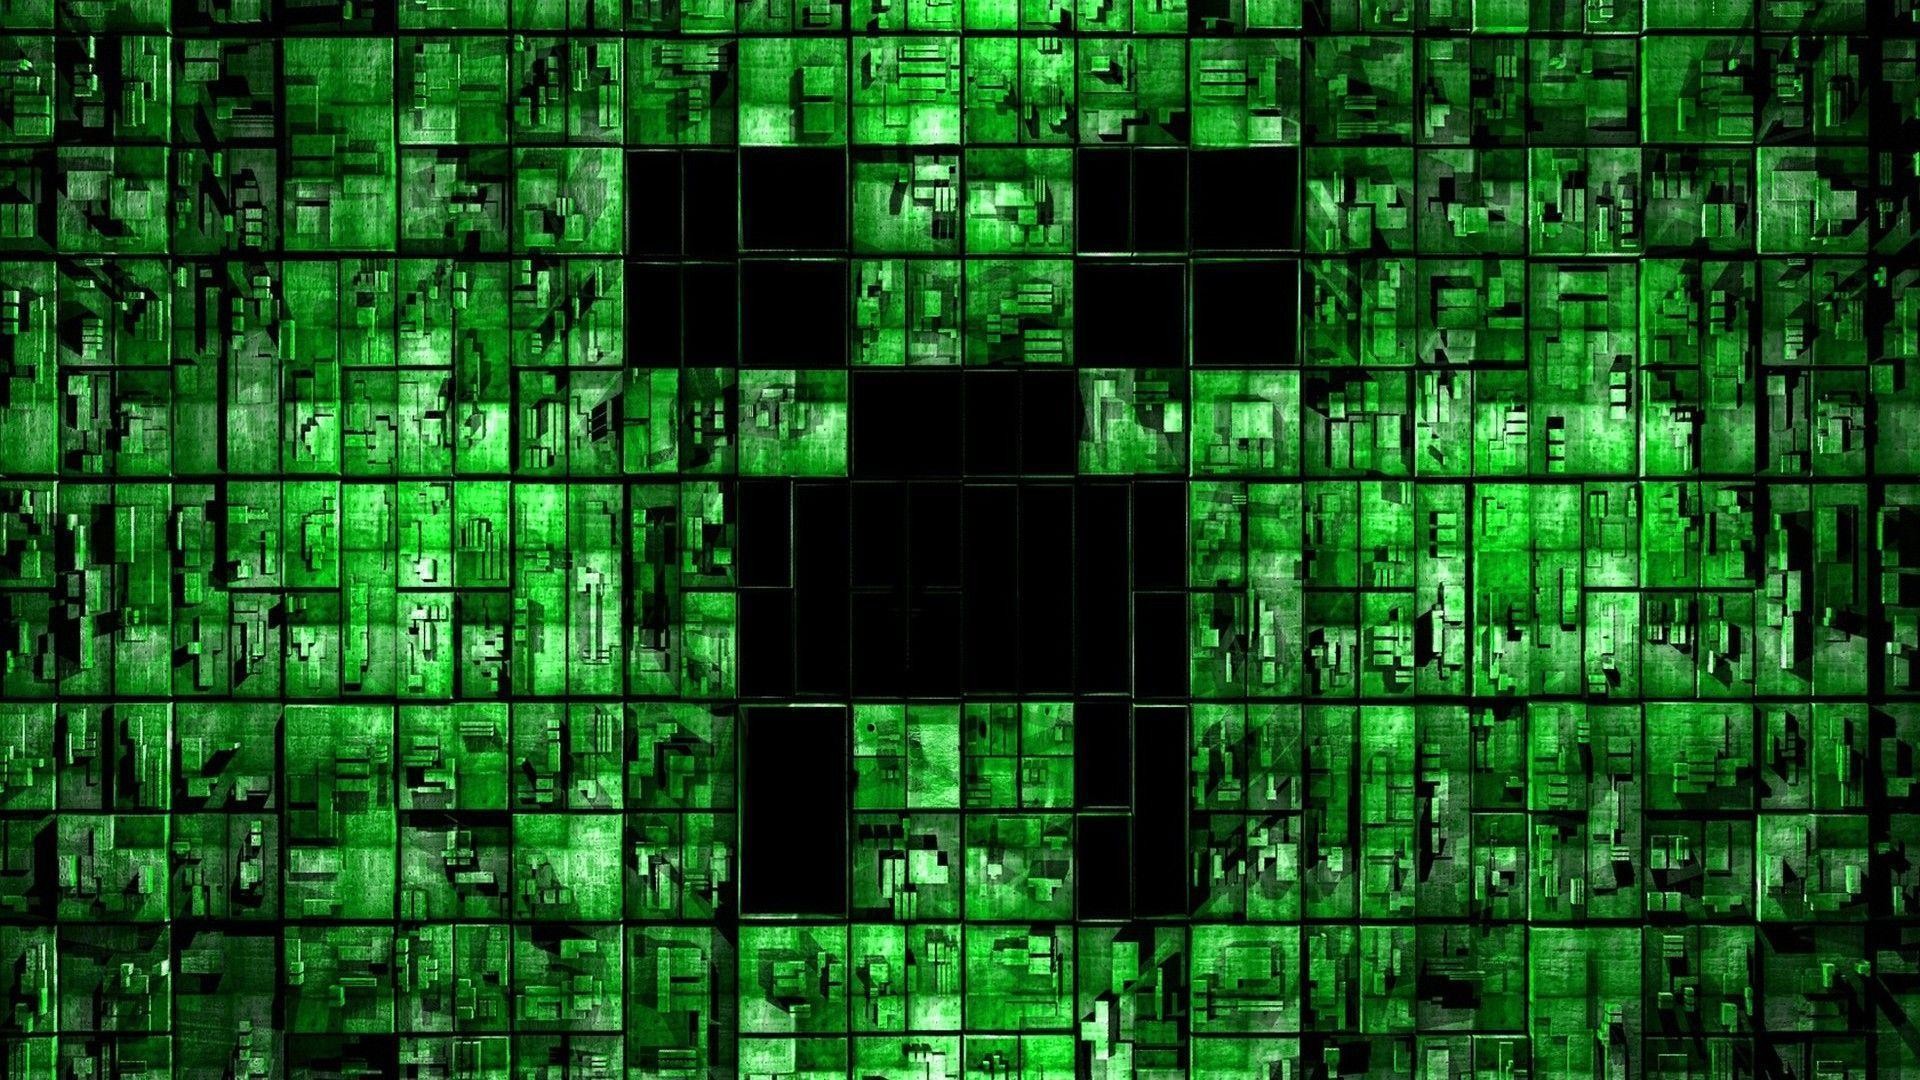 1920x1080 Hd Wallpapers Minecraft Creeper Background 1 HD Wallpapers | Hdimges.